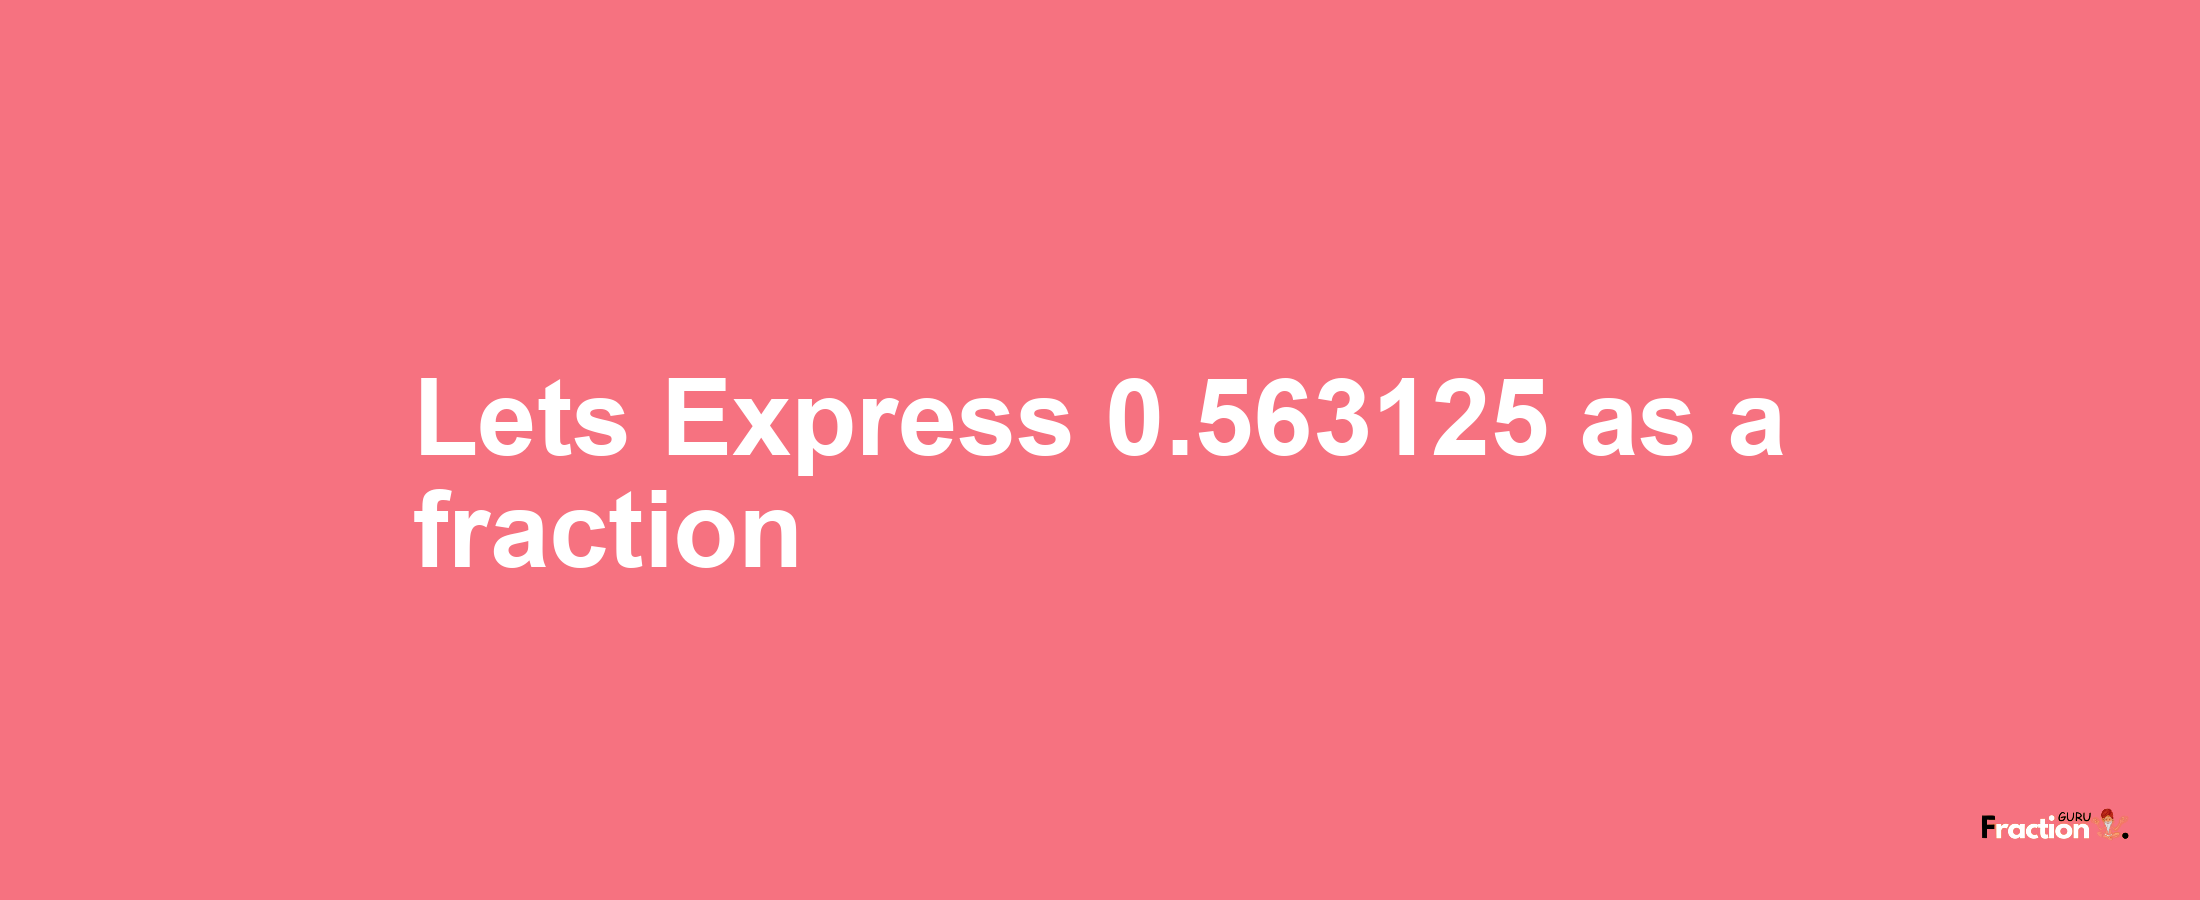 Lets Express 0.563125 as afraction